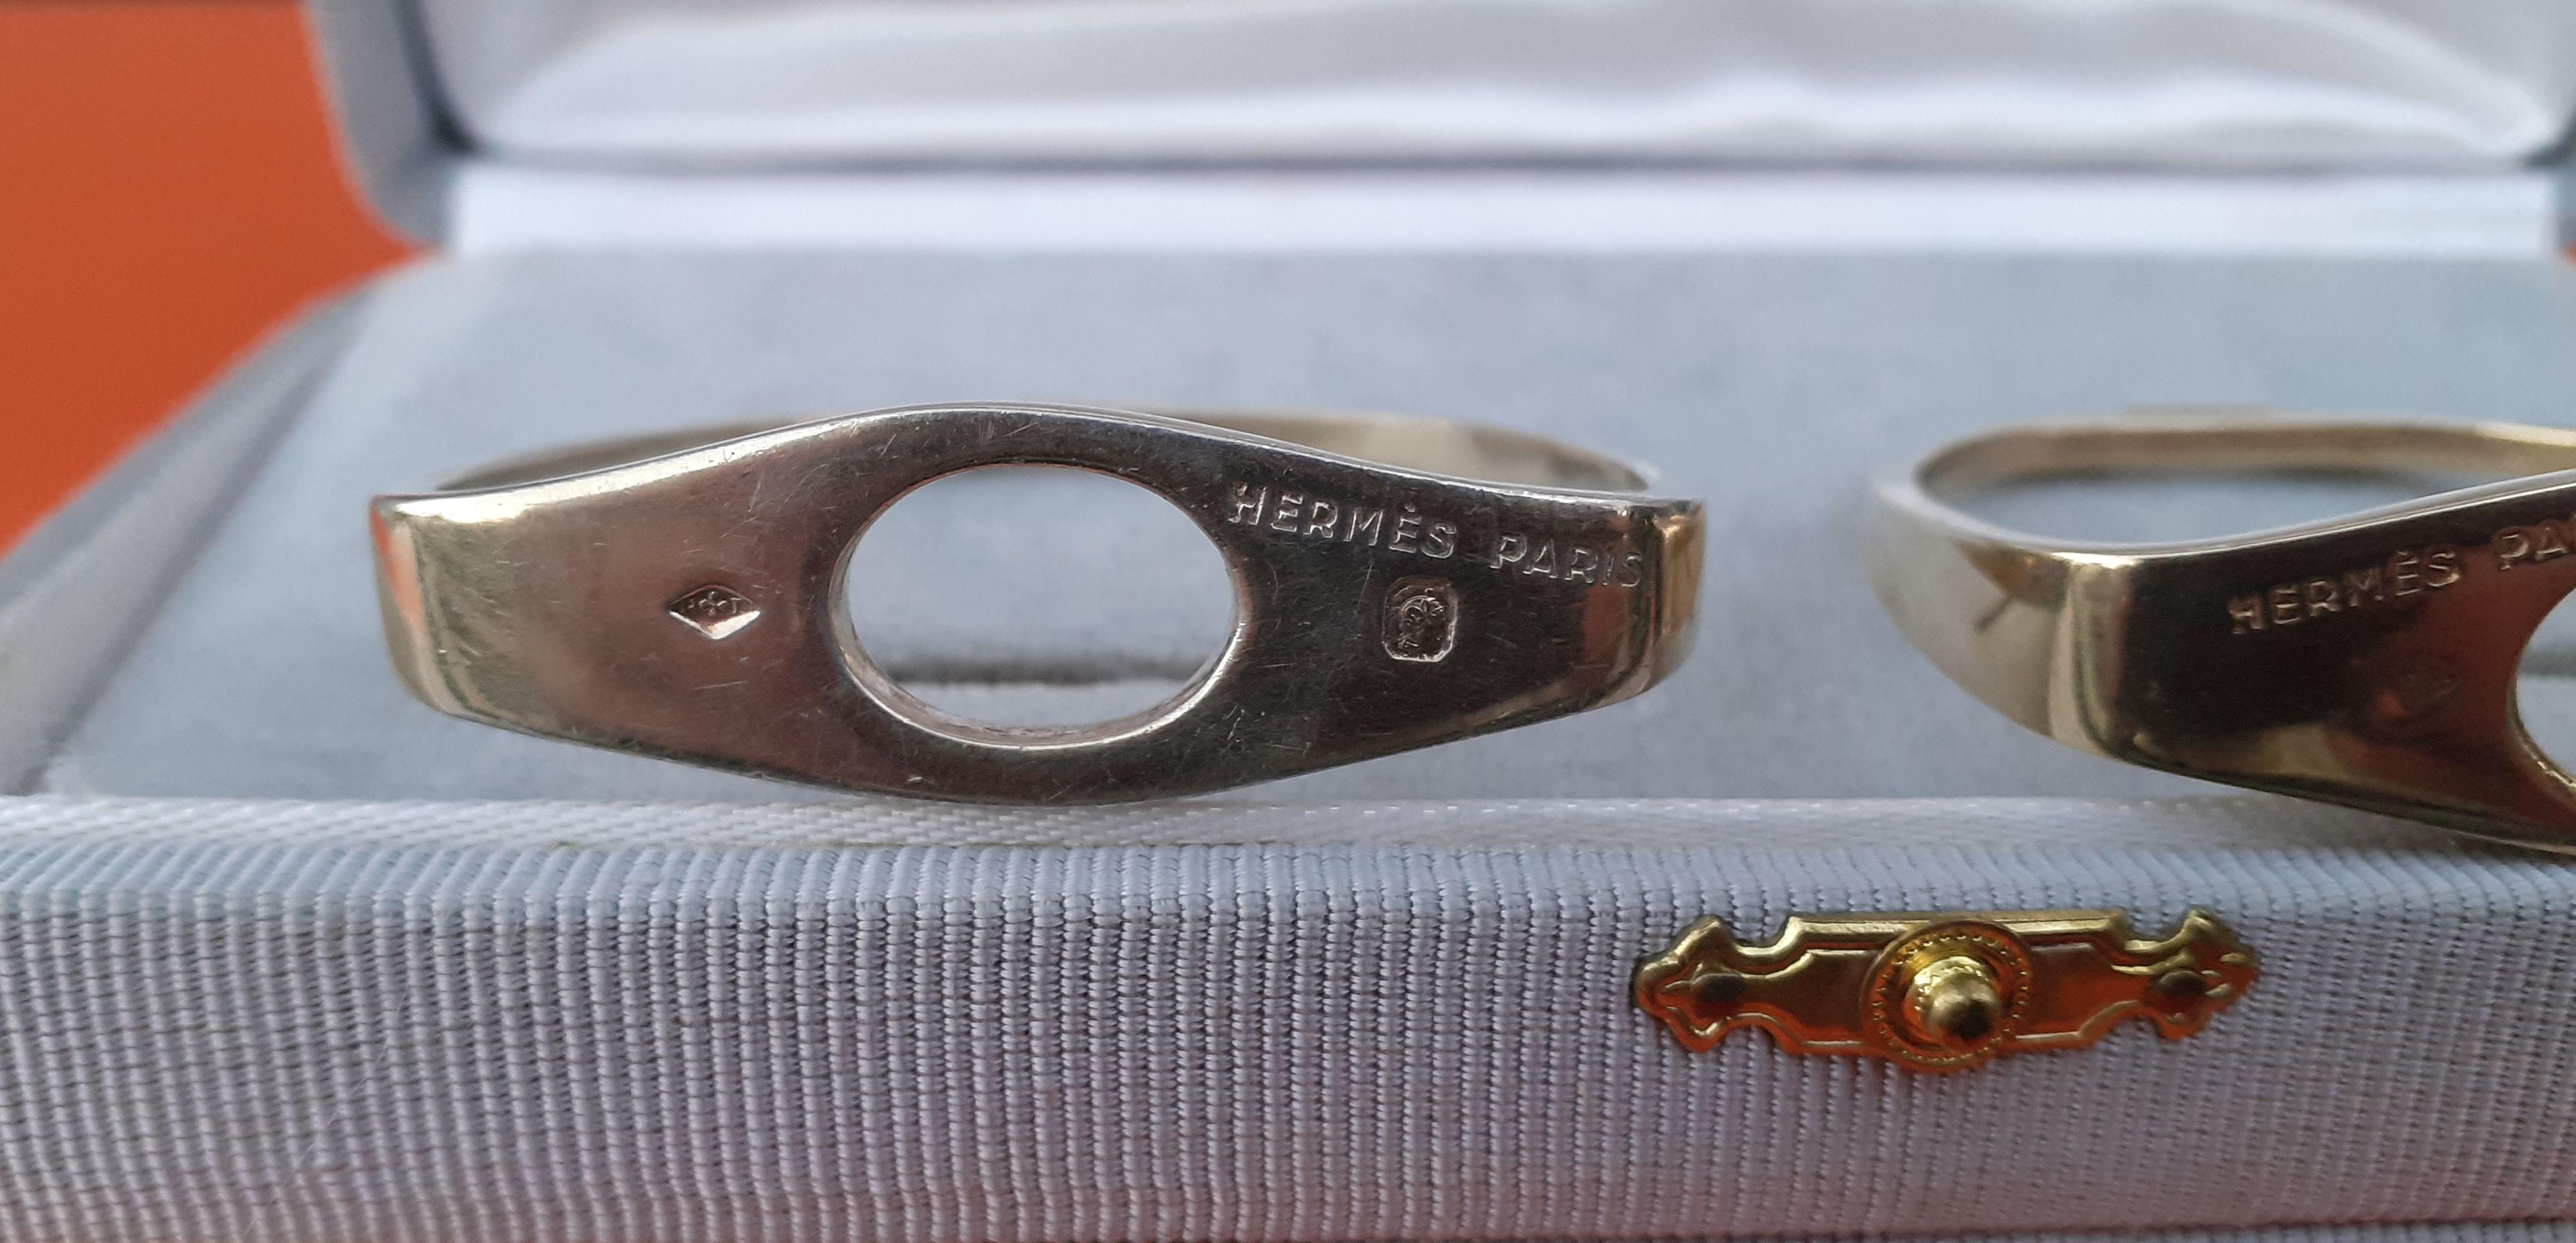 Exceptional Hermès Set of 2 Napkin Rings Stirrups Shaped in Silver-Gilt Texas For Sale 5